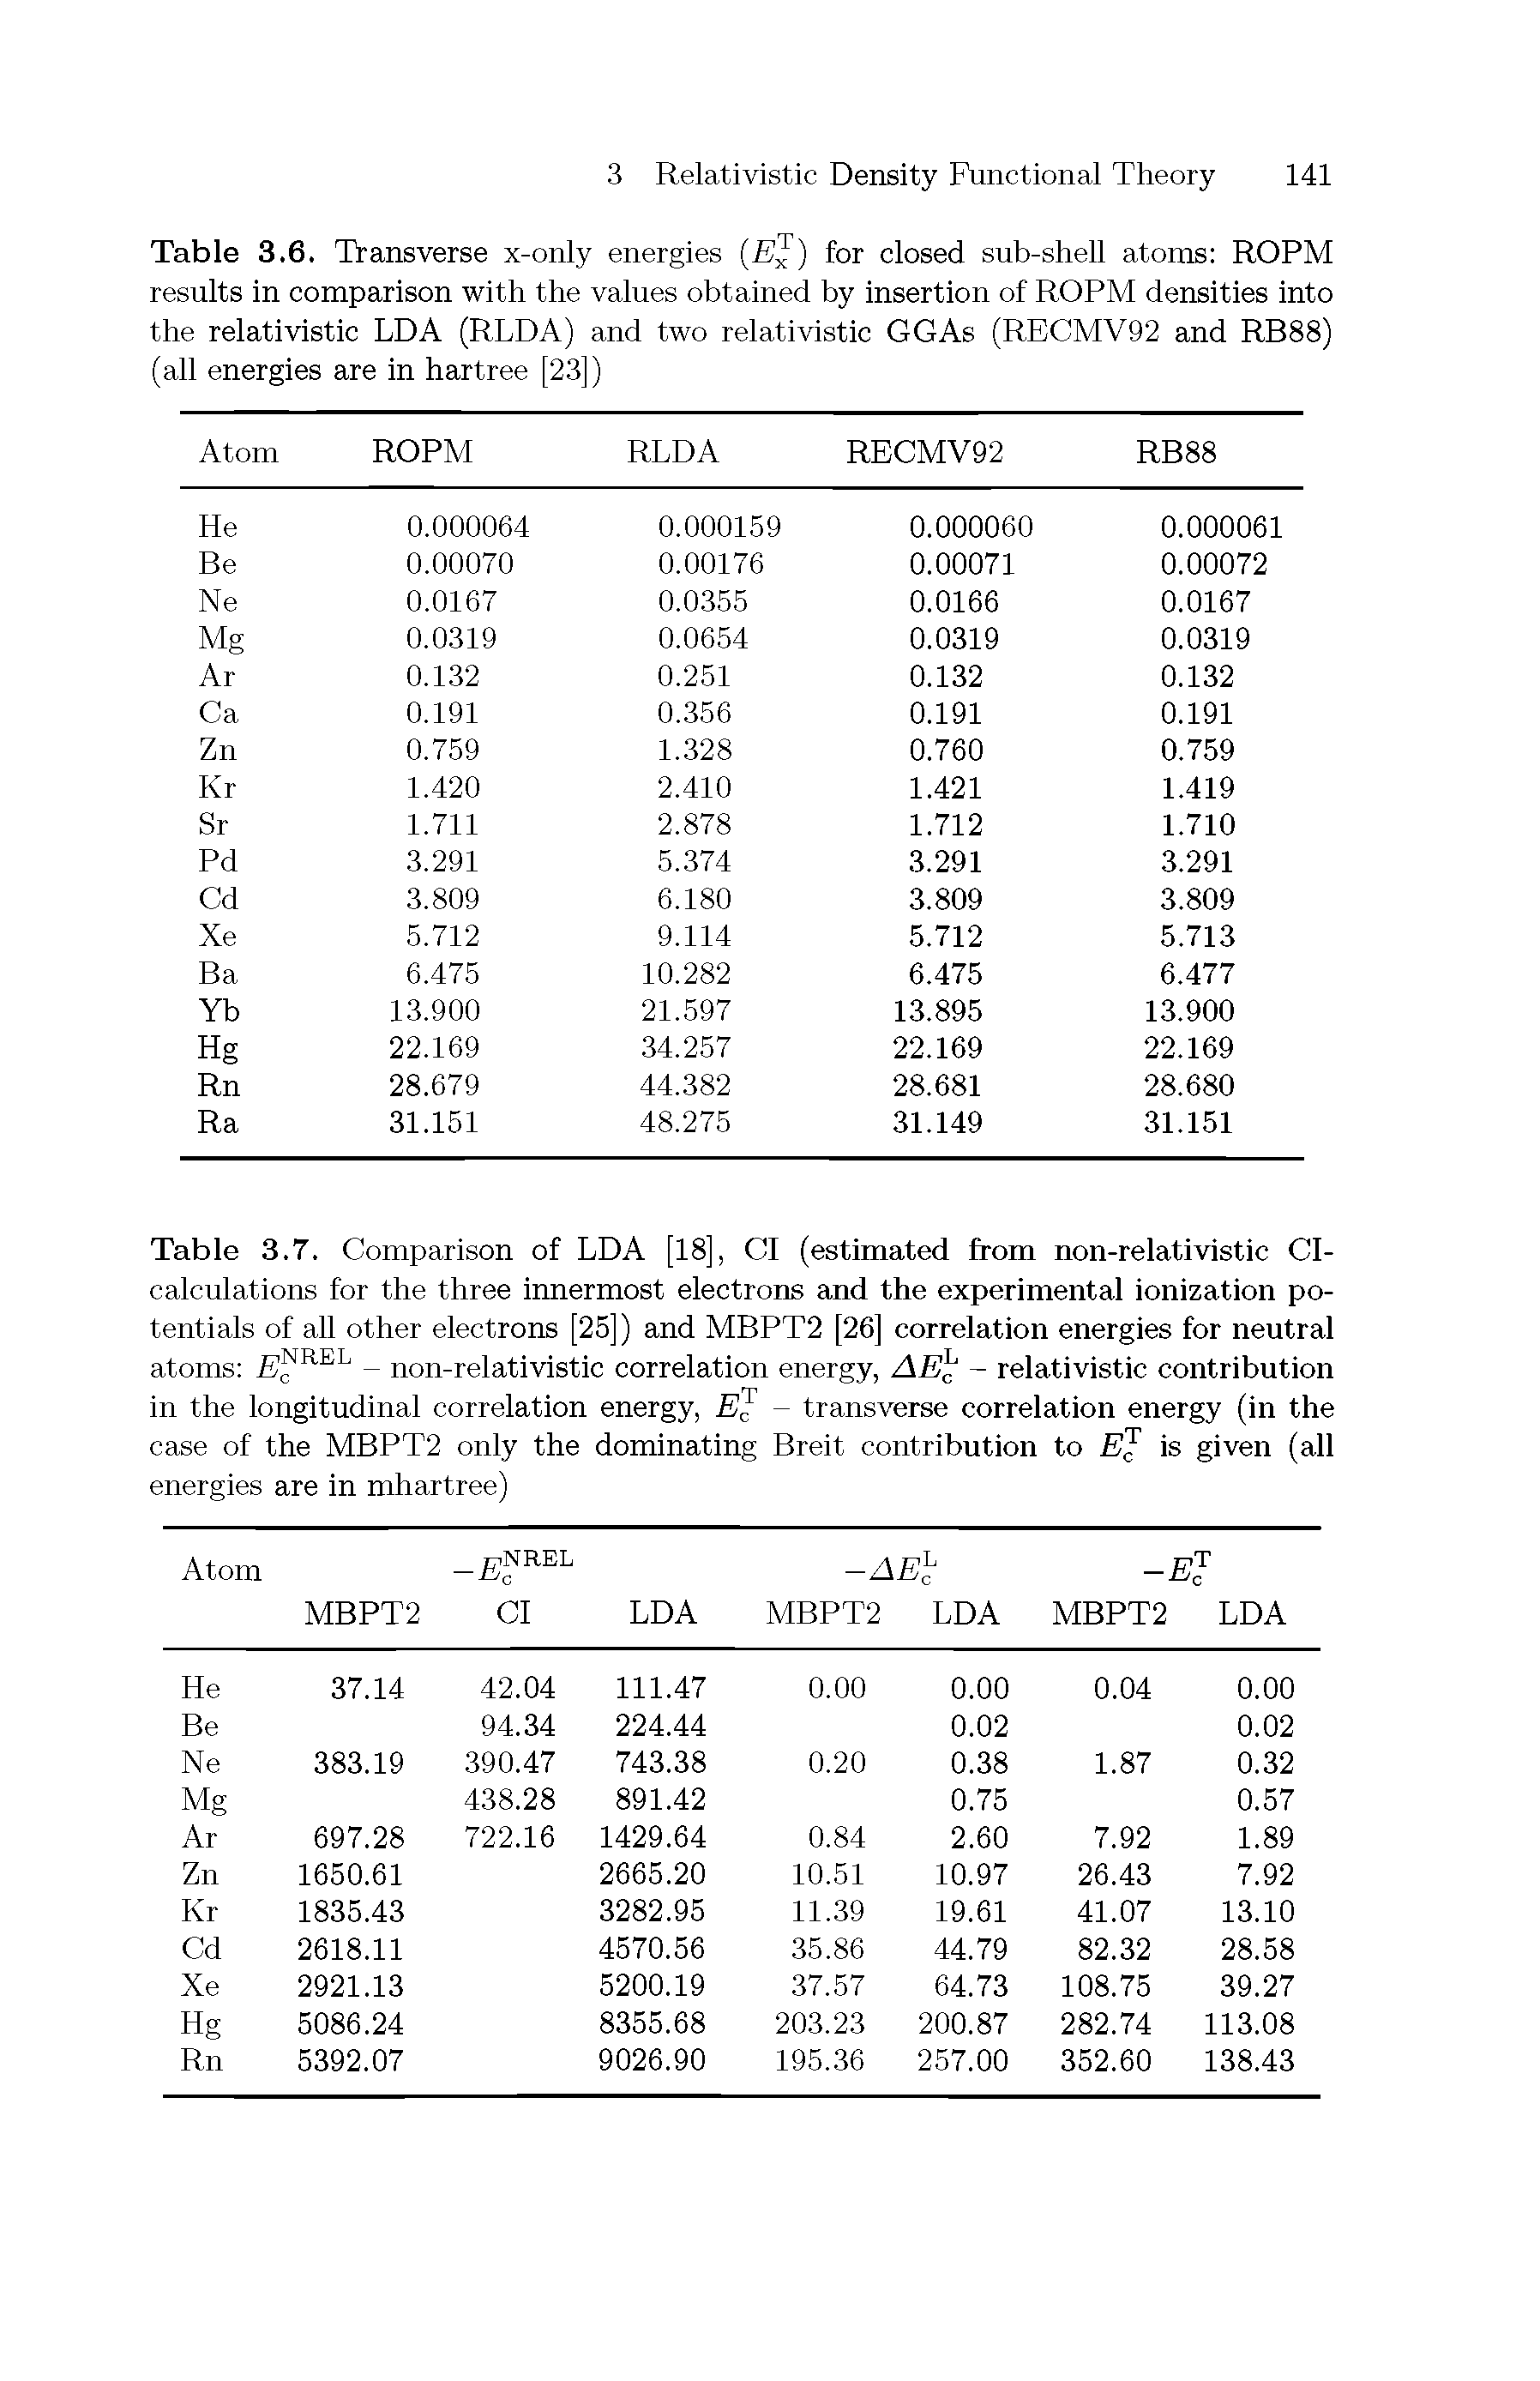 Table 3.7. Comparison of LDA [18], Cl (estimated from non-relativistic CI-calculations for the three innermost electrons and the experimental ionization potentials of all other electrons [25]) and MBPT2 [26] correlation energies for neutral atoms - non-relativistic correlation energy, AE - relativistic contribution...